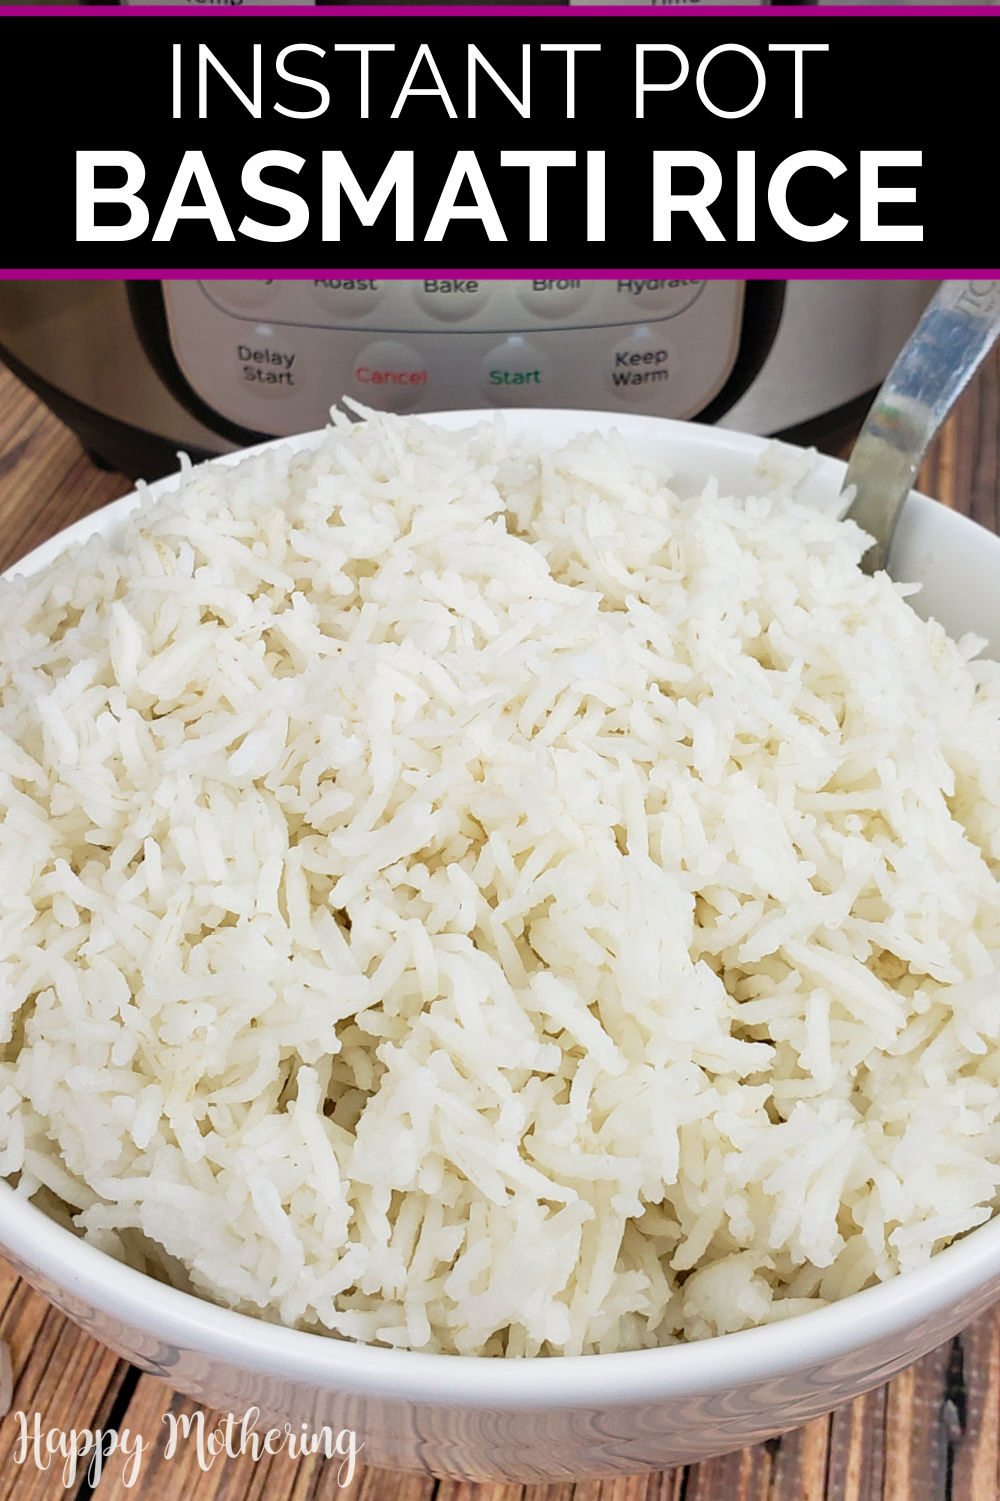 White serving bowl filled with basmati rice with serving spoon in front of Instant Pot.